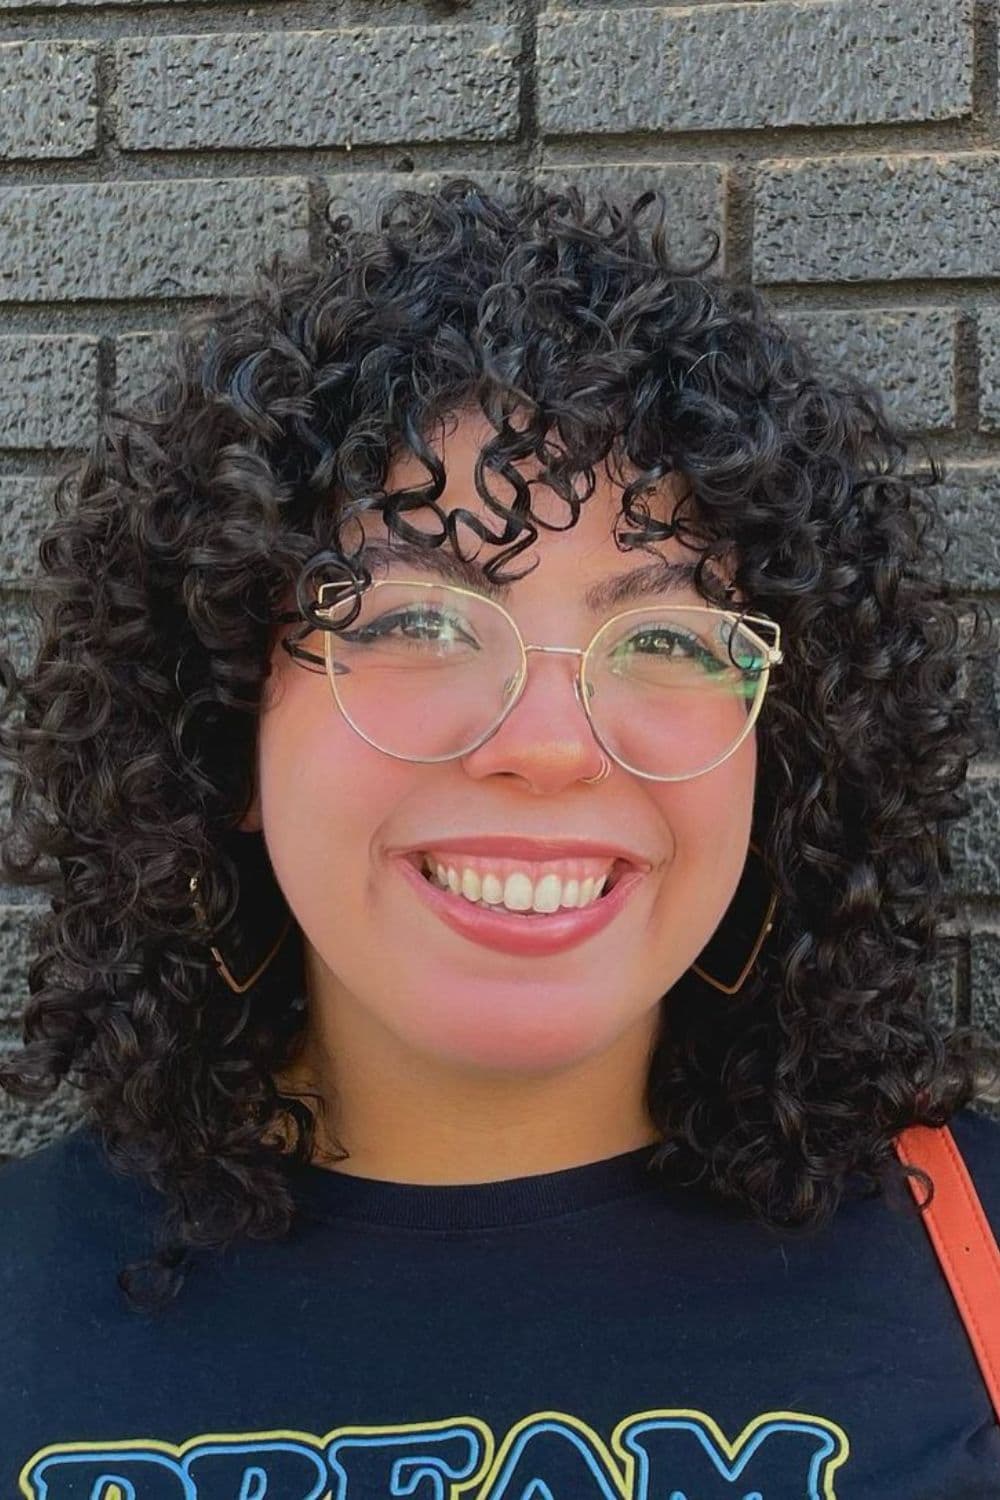 A woman with a black curly hair and curly bangs.